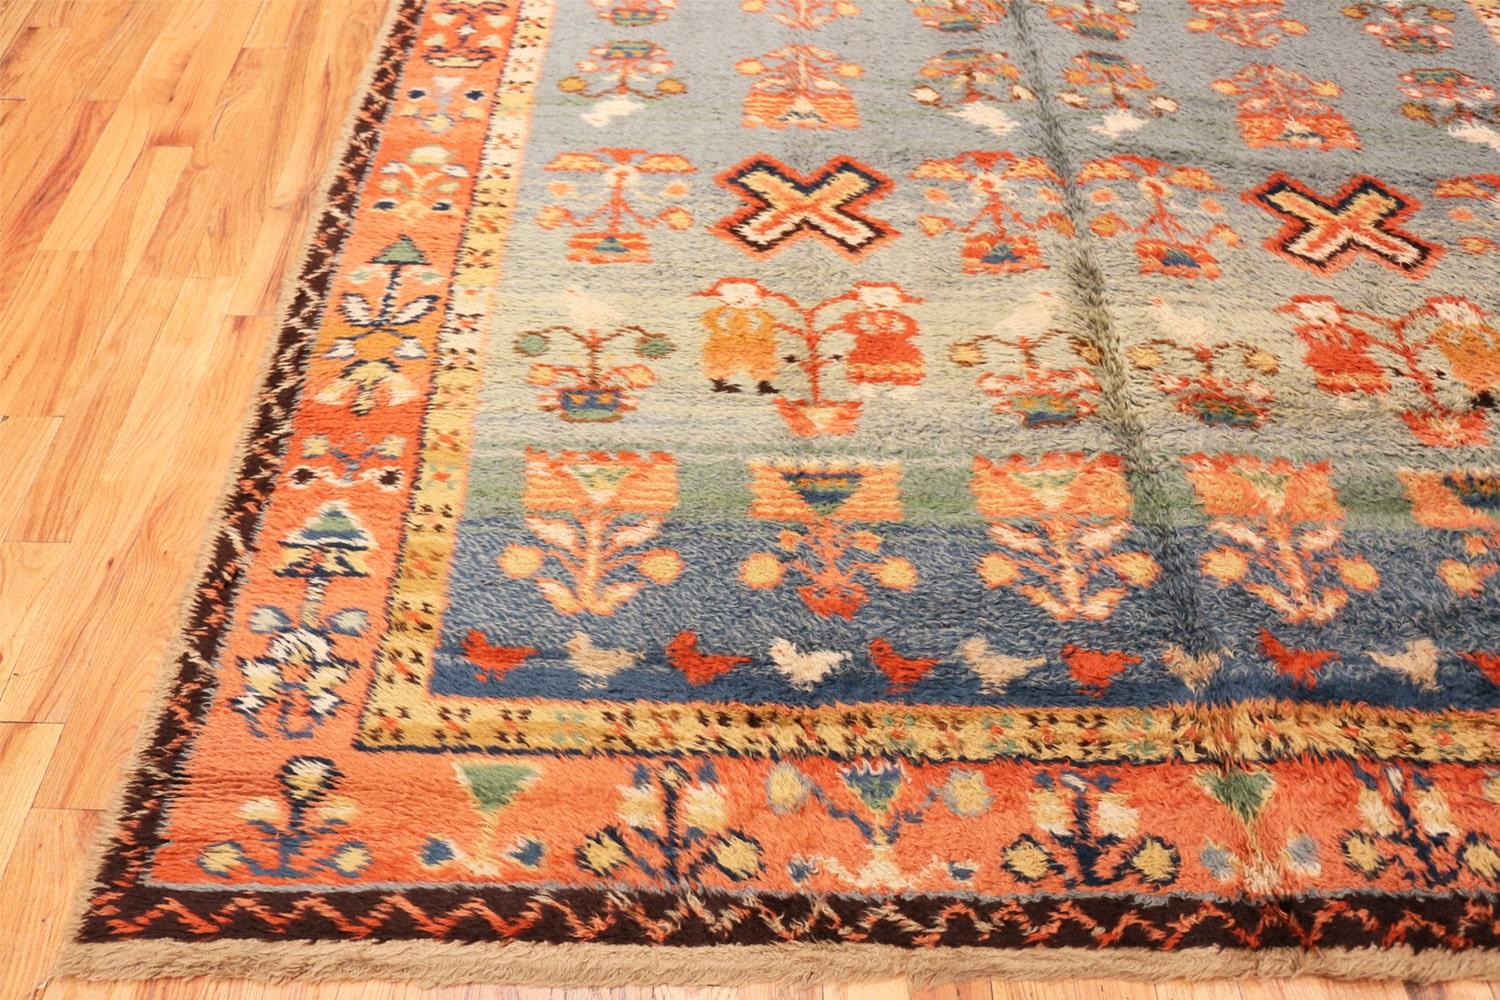 Vintage Folk Art Shag rug, country of origin: Germany, circa mid-20th century. Size: 7 ft 10 in x 11 ft (2.39 m x 3.35 m)

Vivid coloring, striking artistry, and breathtaking traditional motifs define this stunning German antique rug. Boasting a